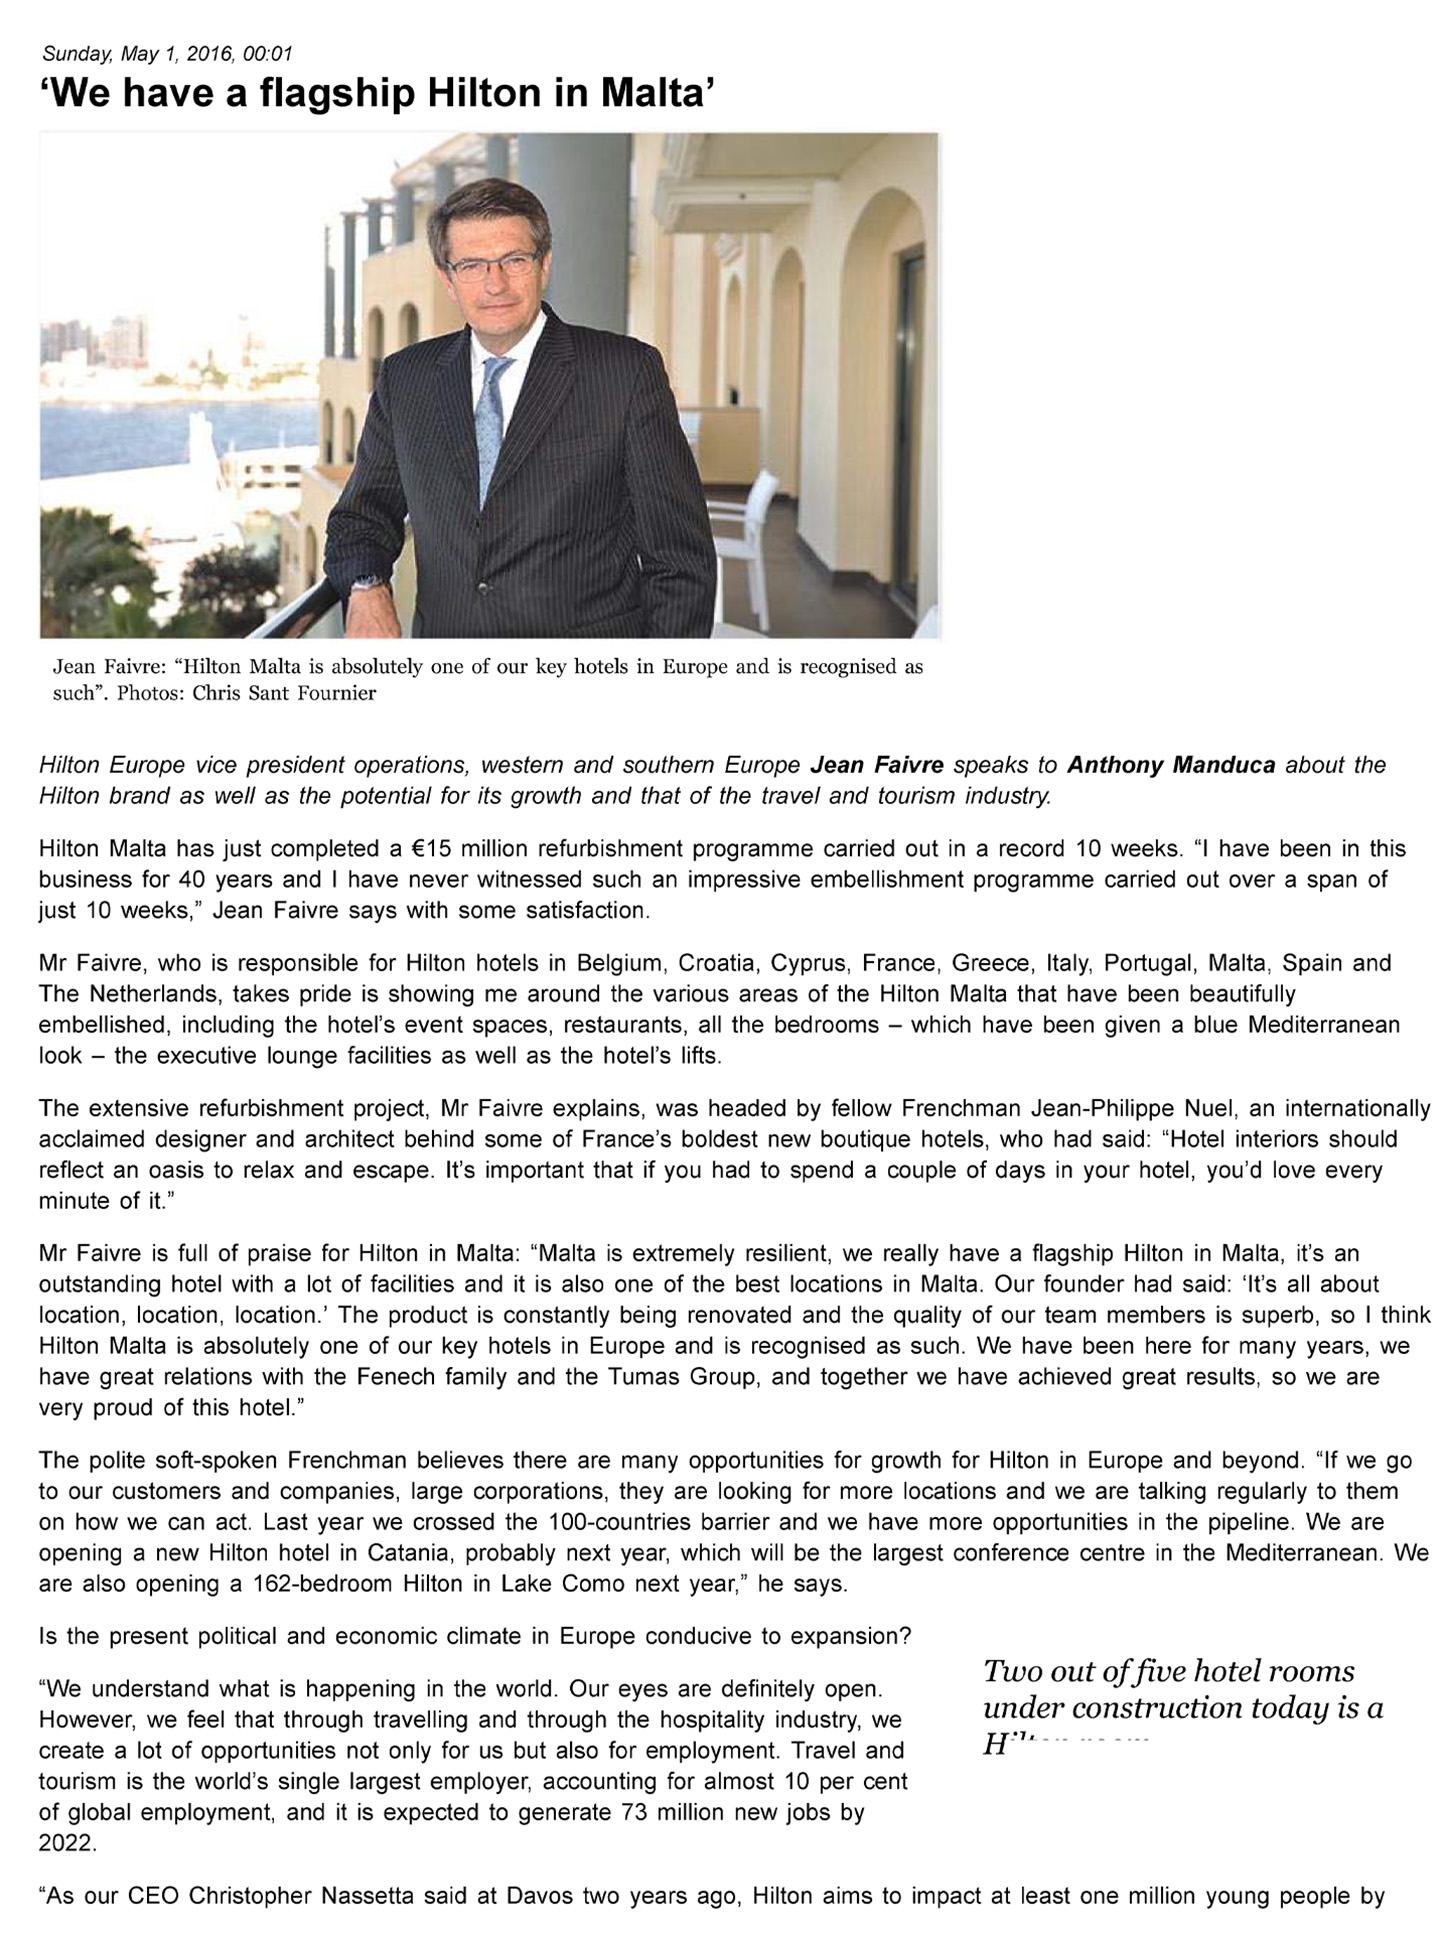 article on the hotel hilton malta in the magazine times of malta, luxury hotel realized by the studio jean-philippe nuel